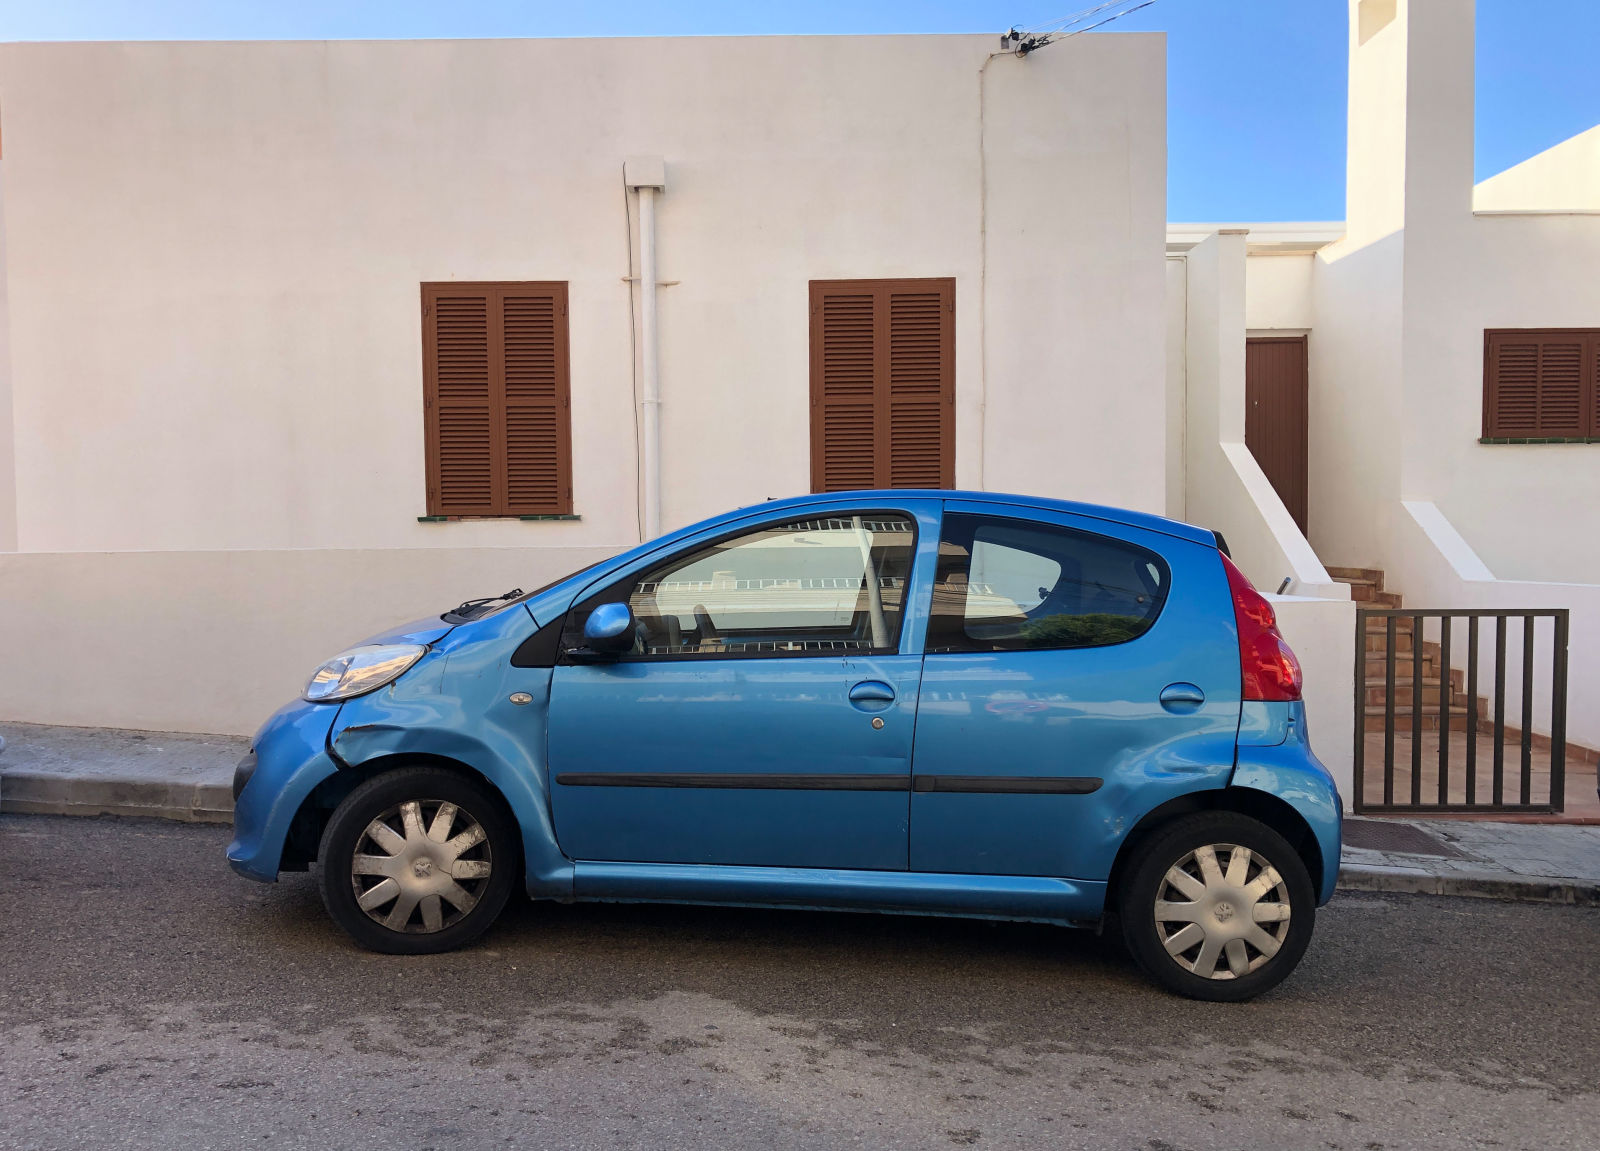 Illustration for article titled Rental Car Review: Mallorca Edition.